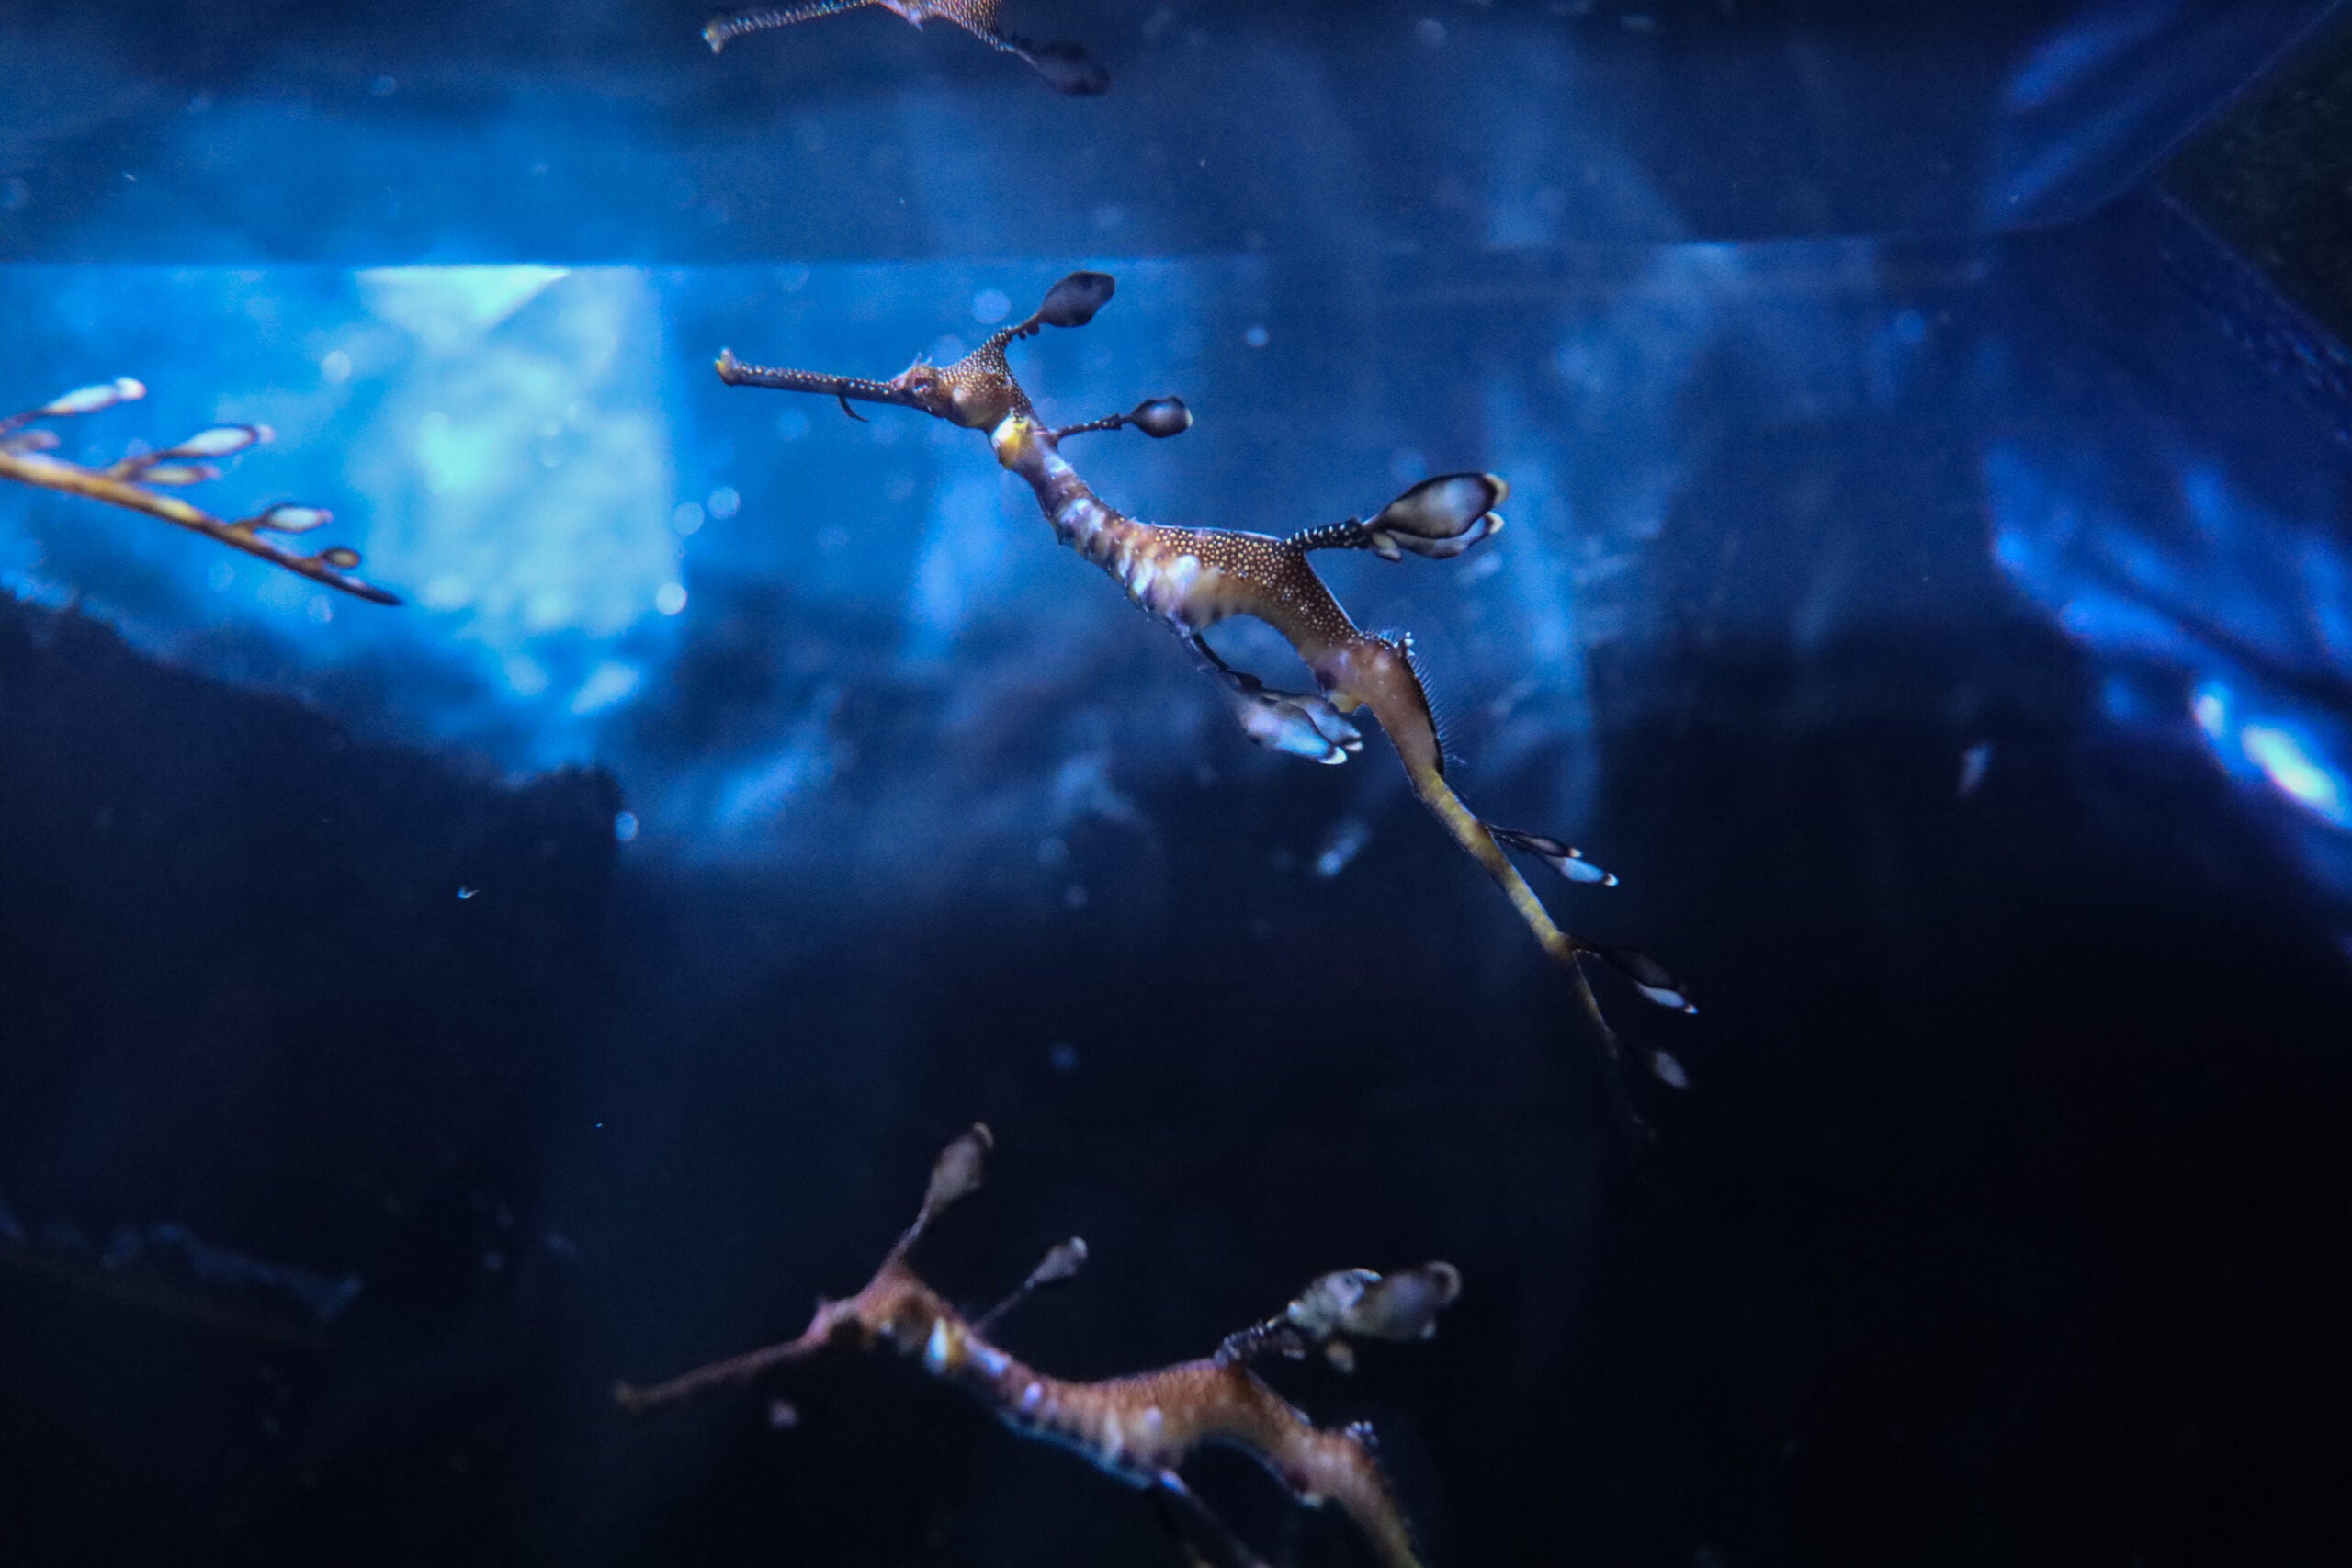 New England Aquarium successfully breeds seadragons after more than a decade of trying